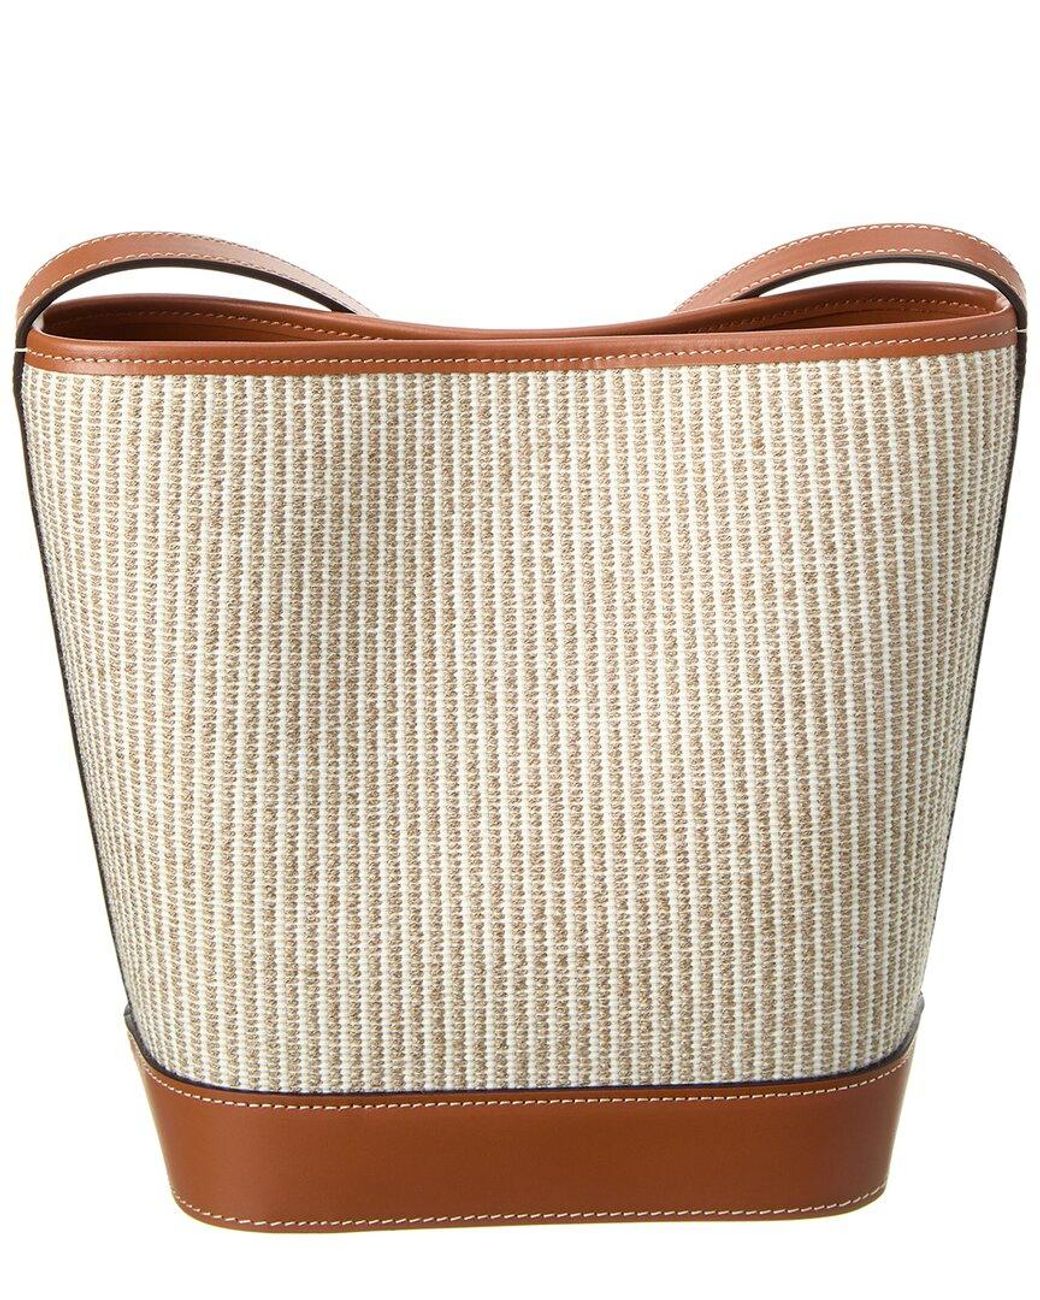 CELINE Triomphe Canvas Small bucket cuir triomphe in smooth